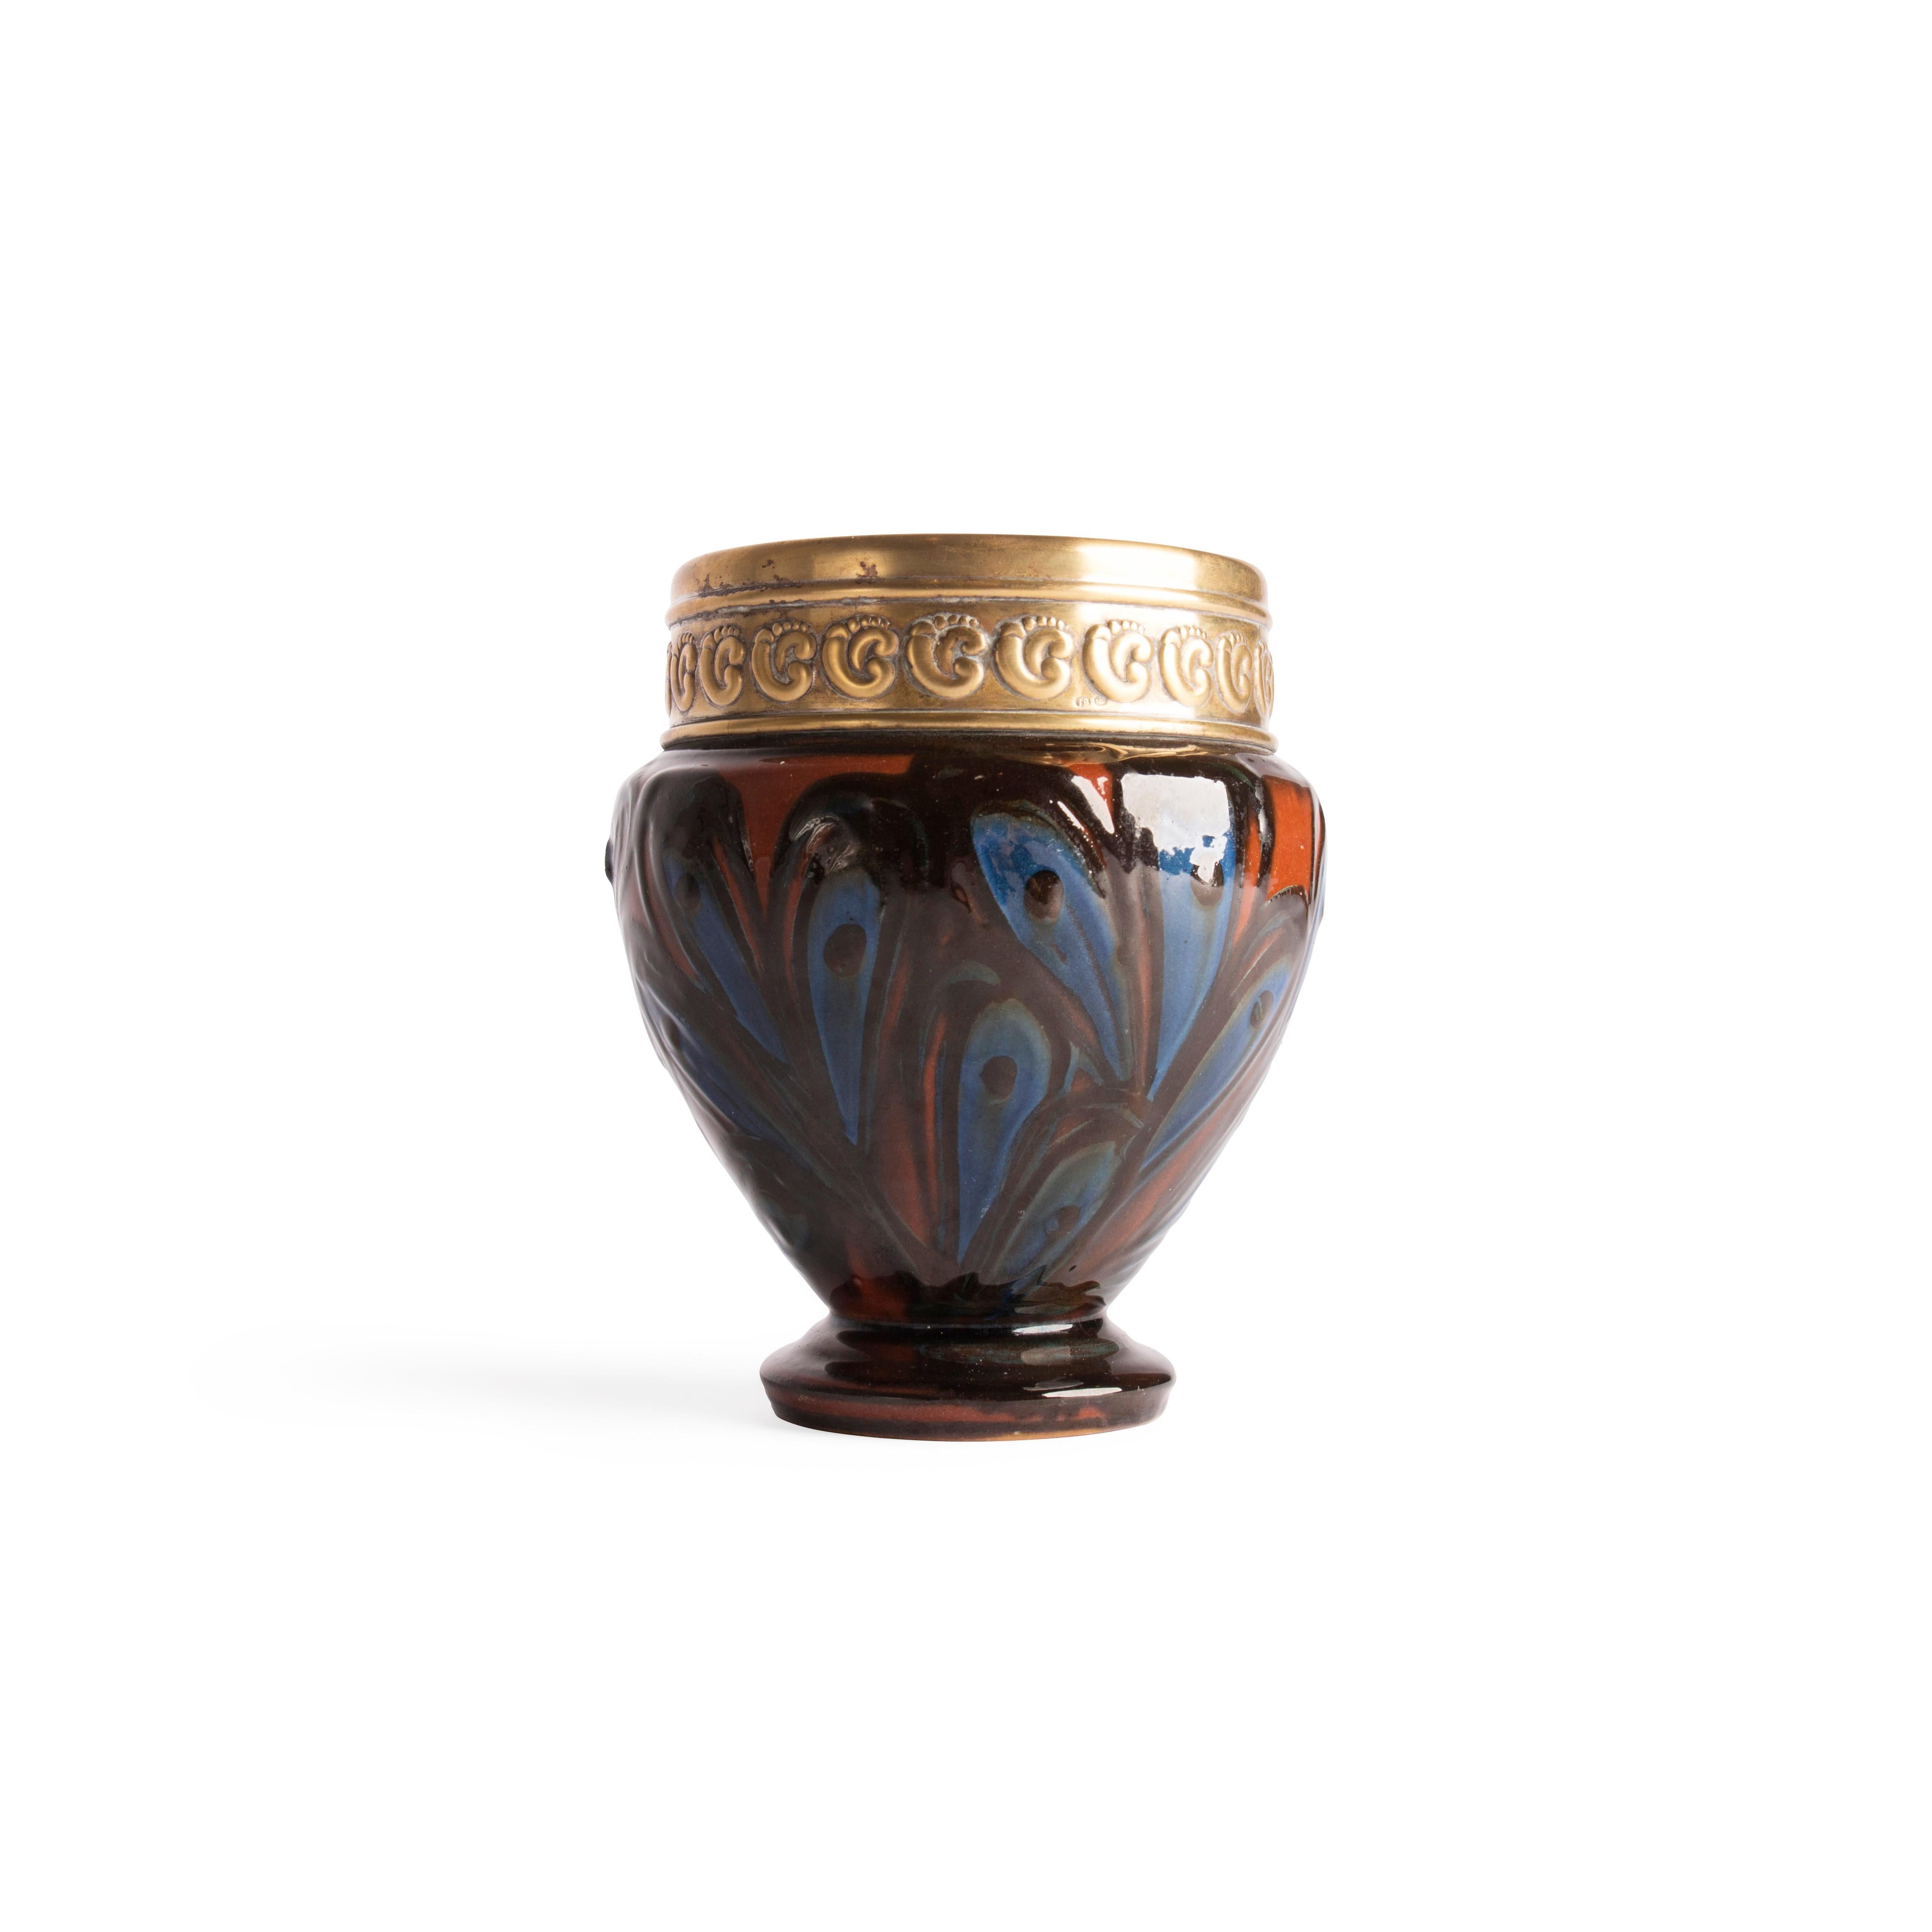 This important vase with a gold plated silverplate mount was designed by Thorvald Bindesbøll (1846-1908) and executed by Herman A. Kähler, Denmark, early 20th century.

The neck has repoussé ornaments in the Scandinavian arts and crafts style